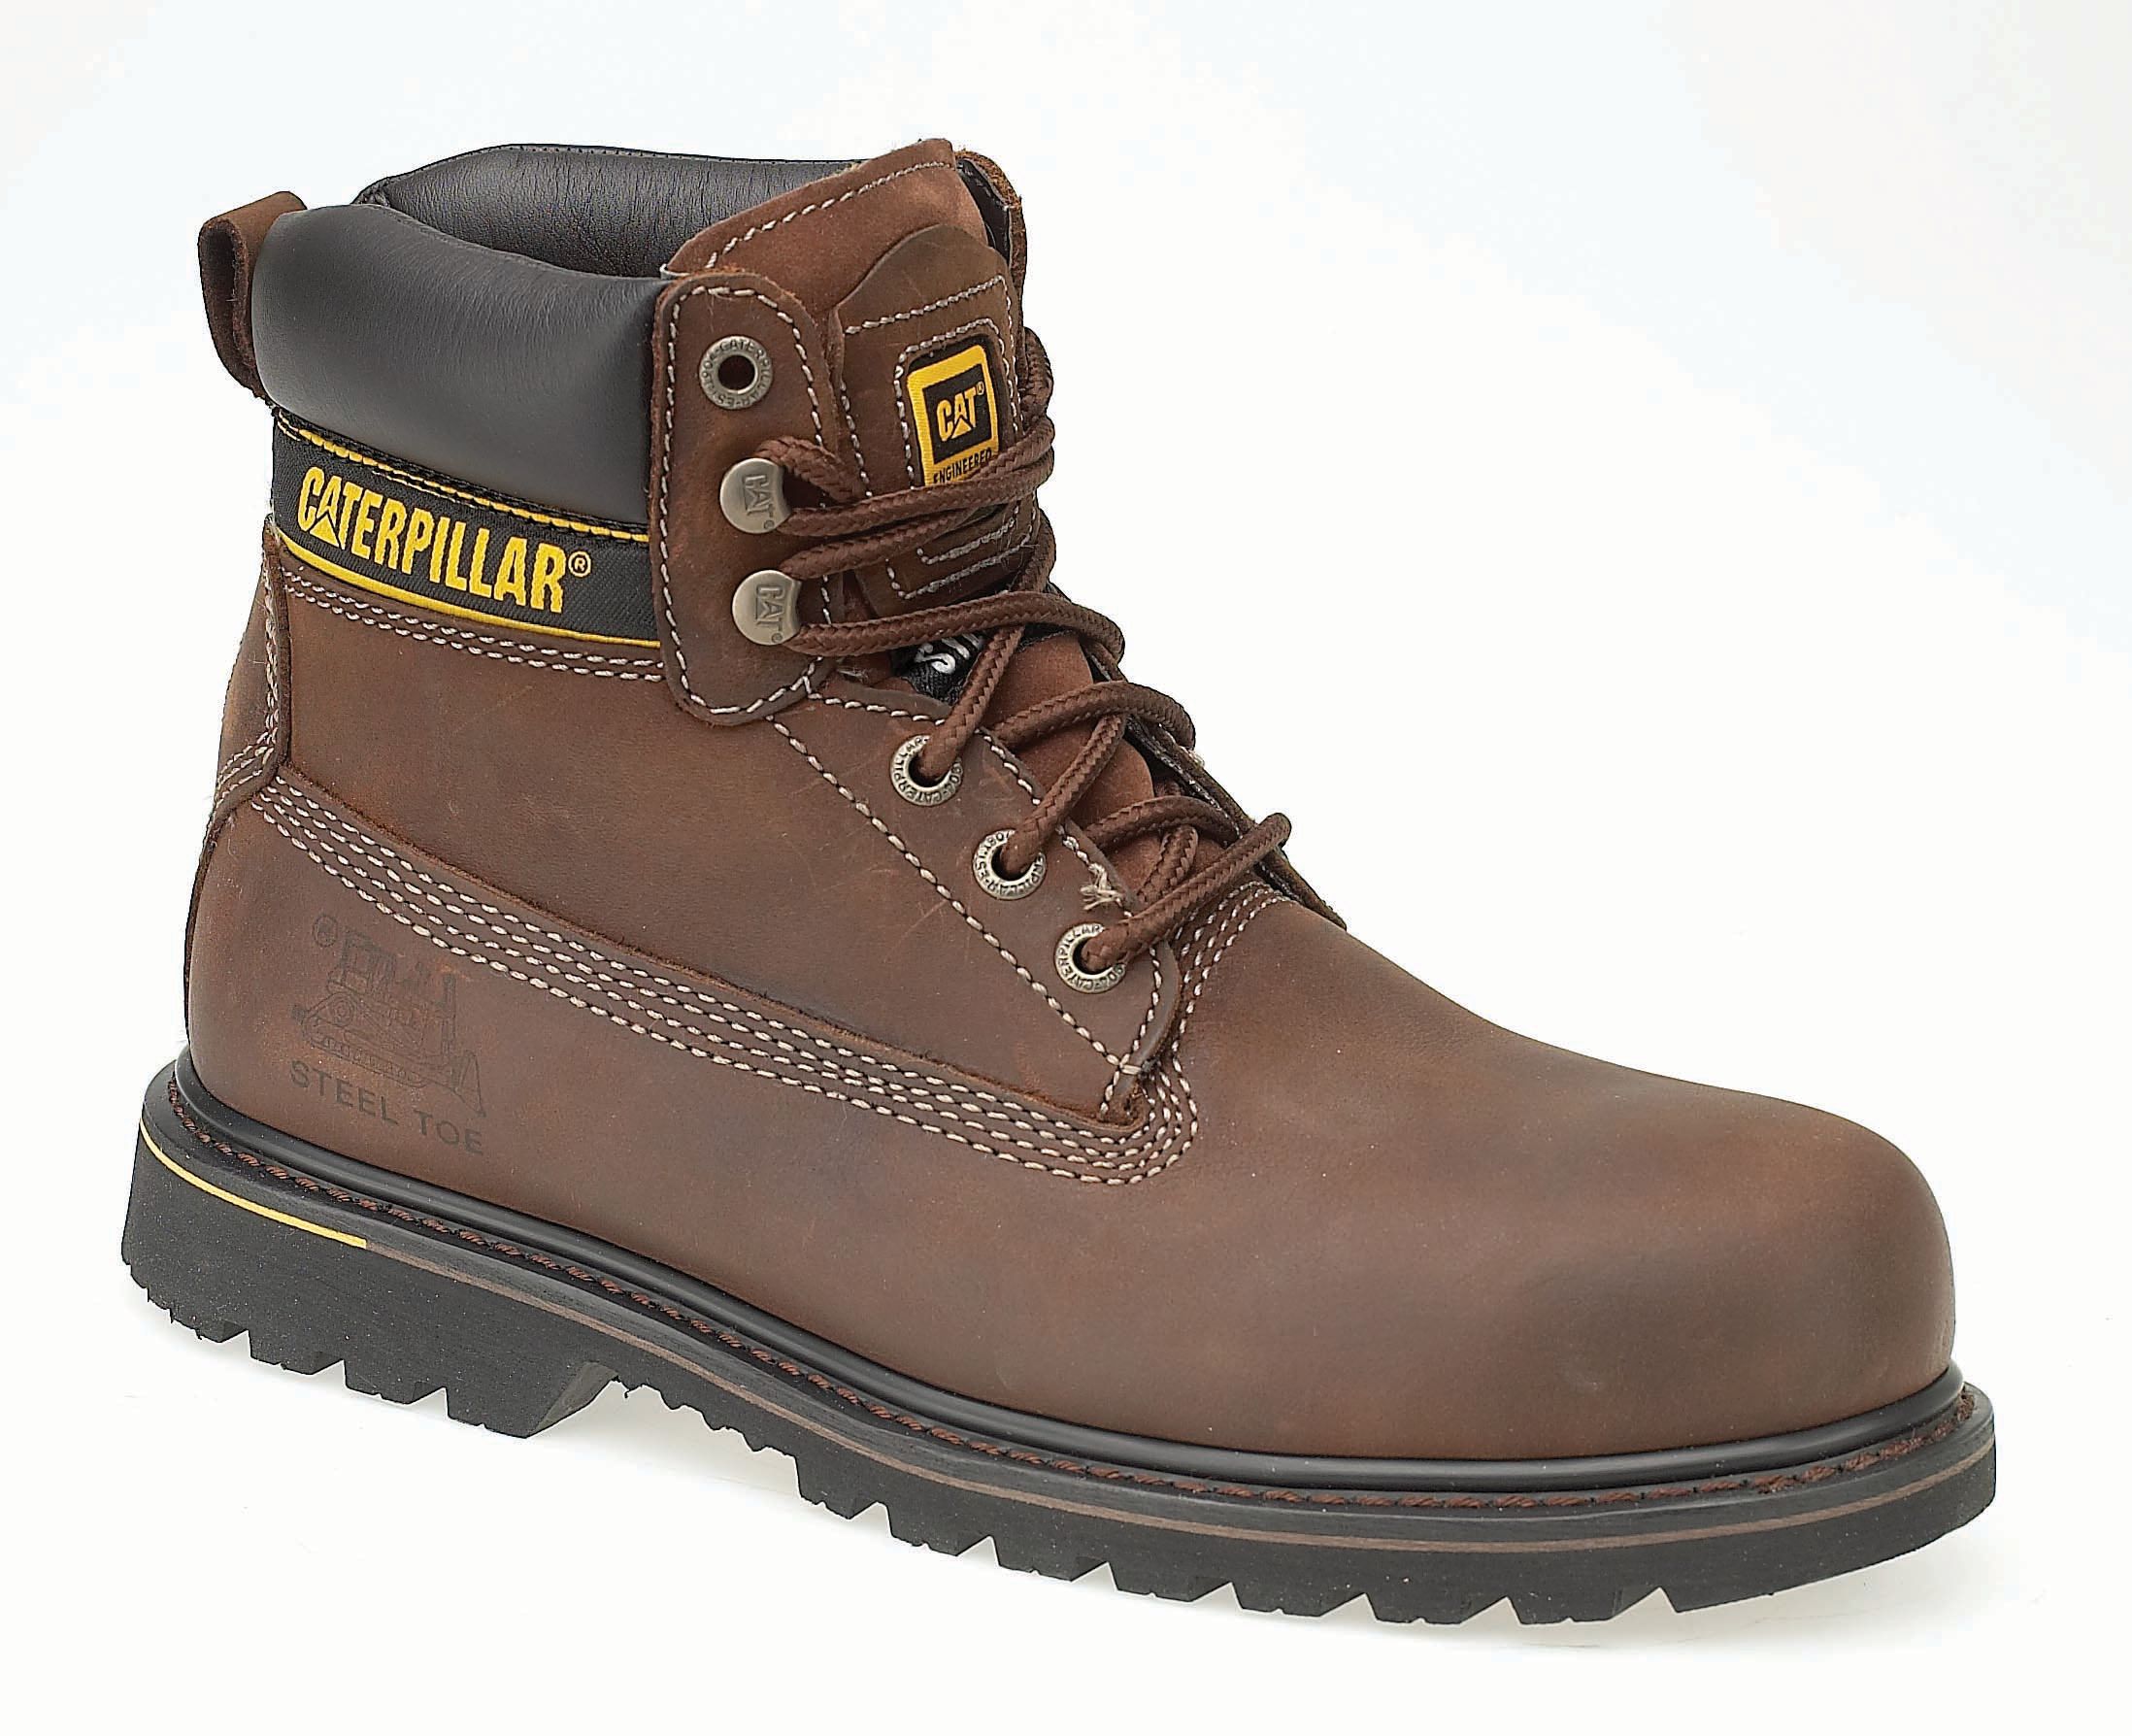 Image of Caterpillar CAT Holton SB Safety Boot - Brown Size 8